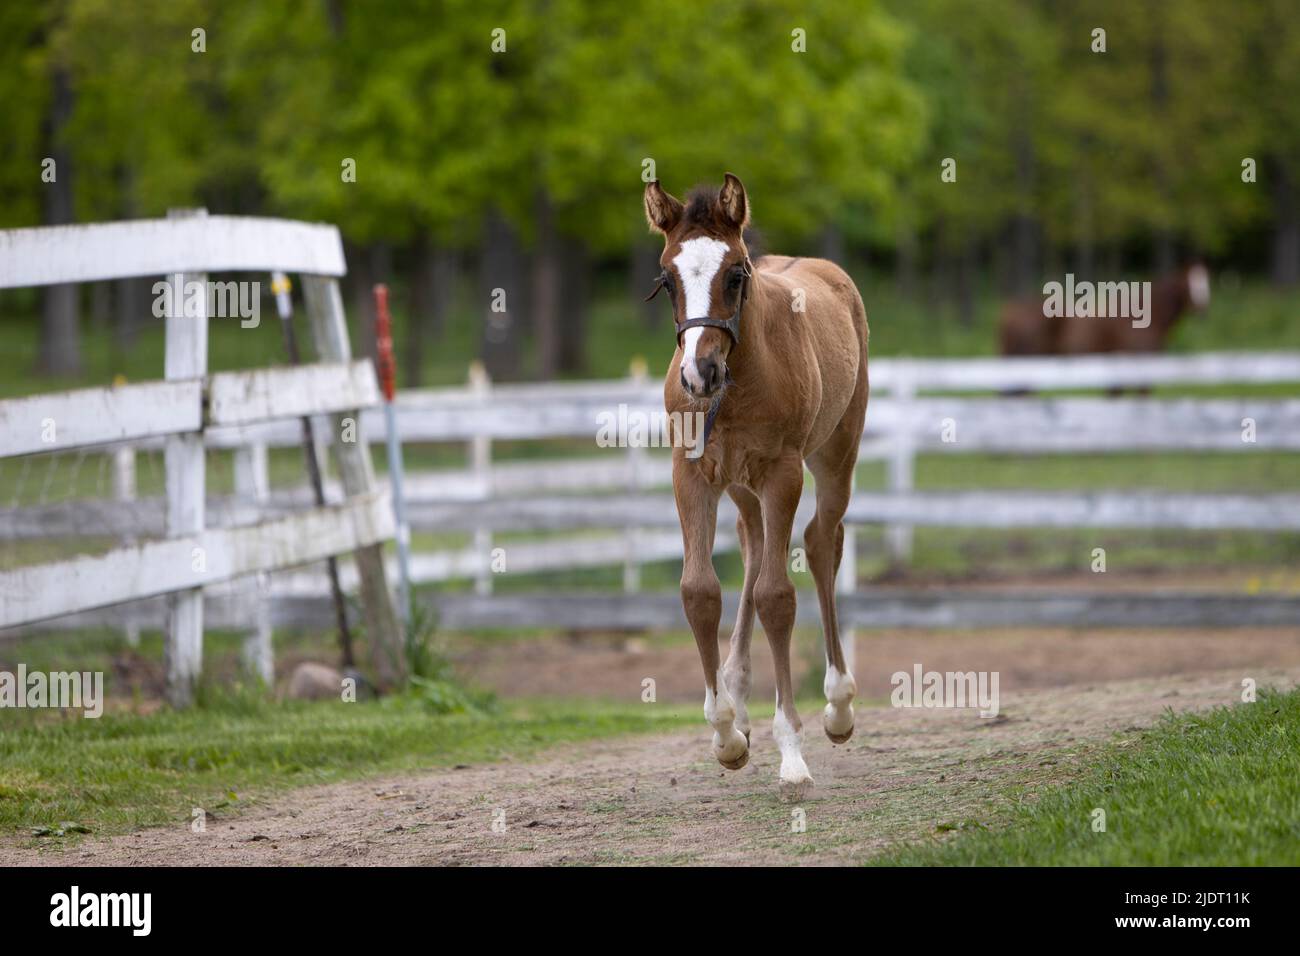 A foal cantering on a path at a horse farm. Stock Photo